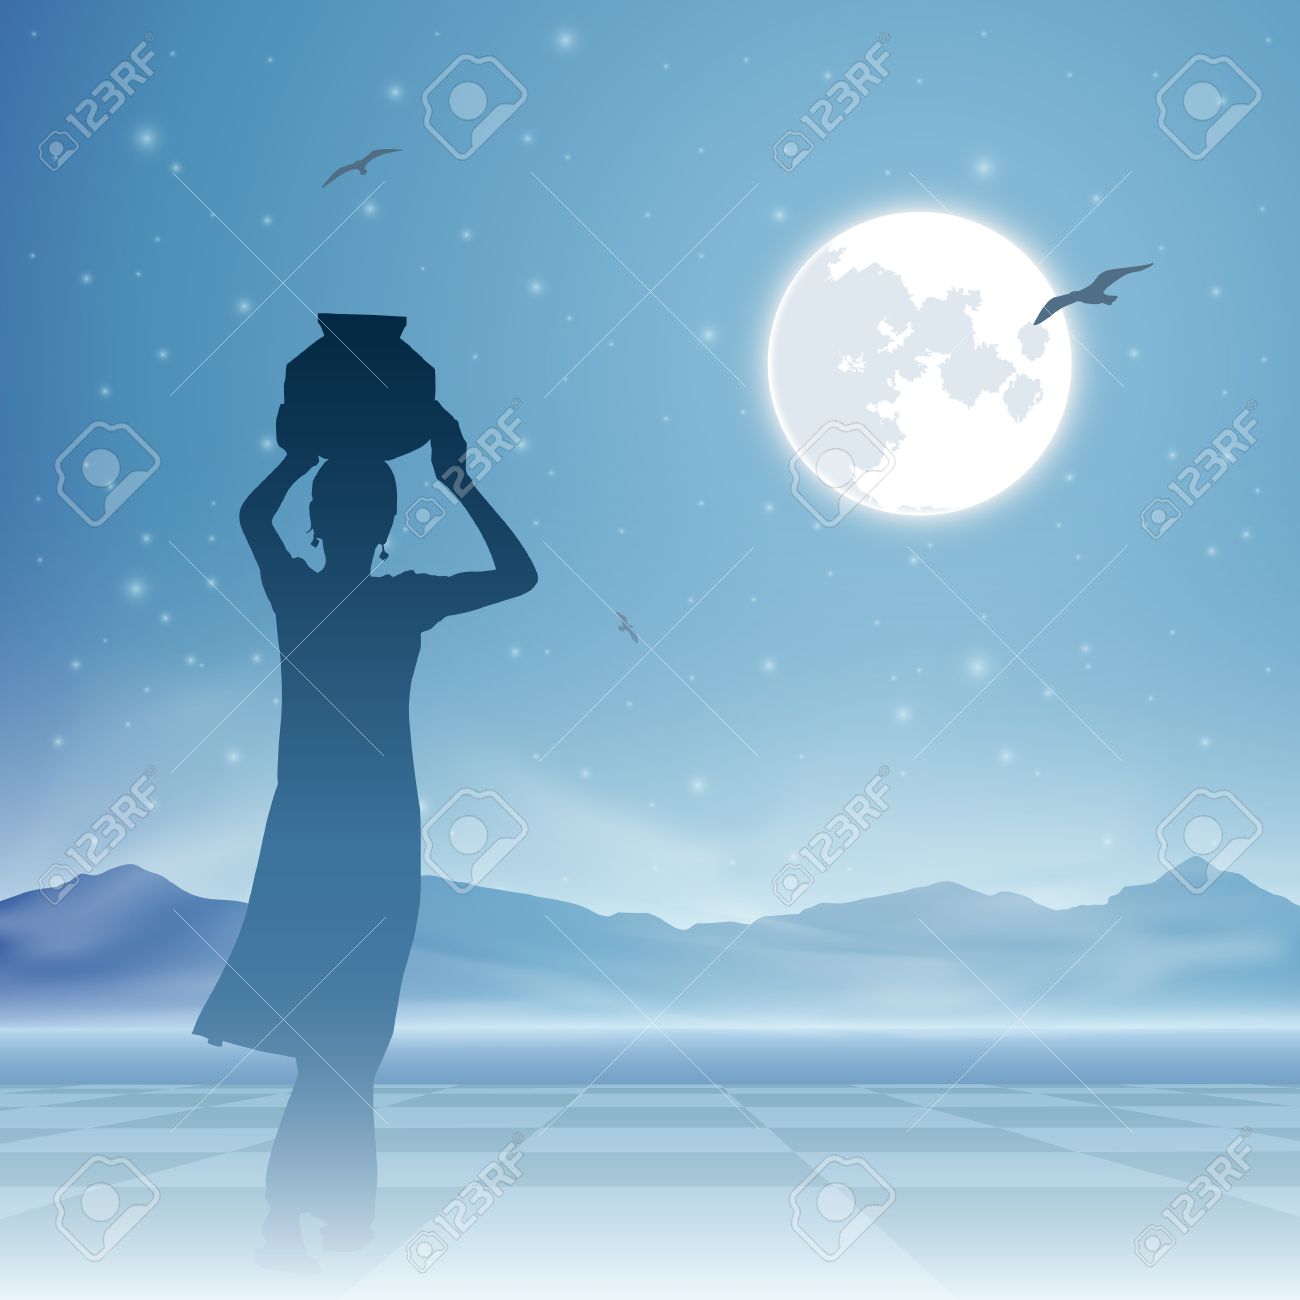 An Indian Girl Carrying Water Jug With Moon And Night Sky Royalty.